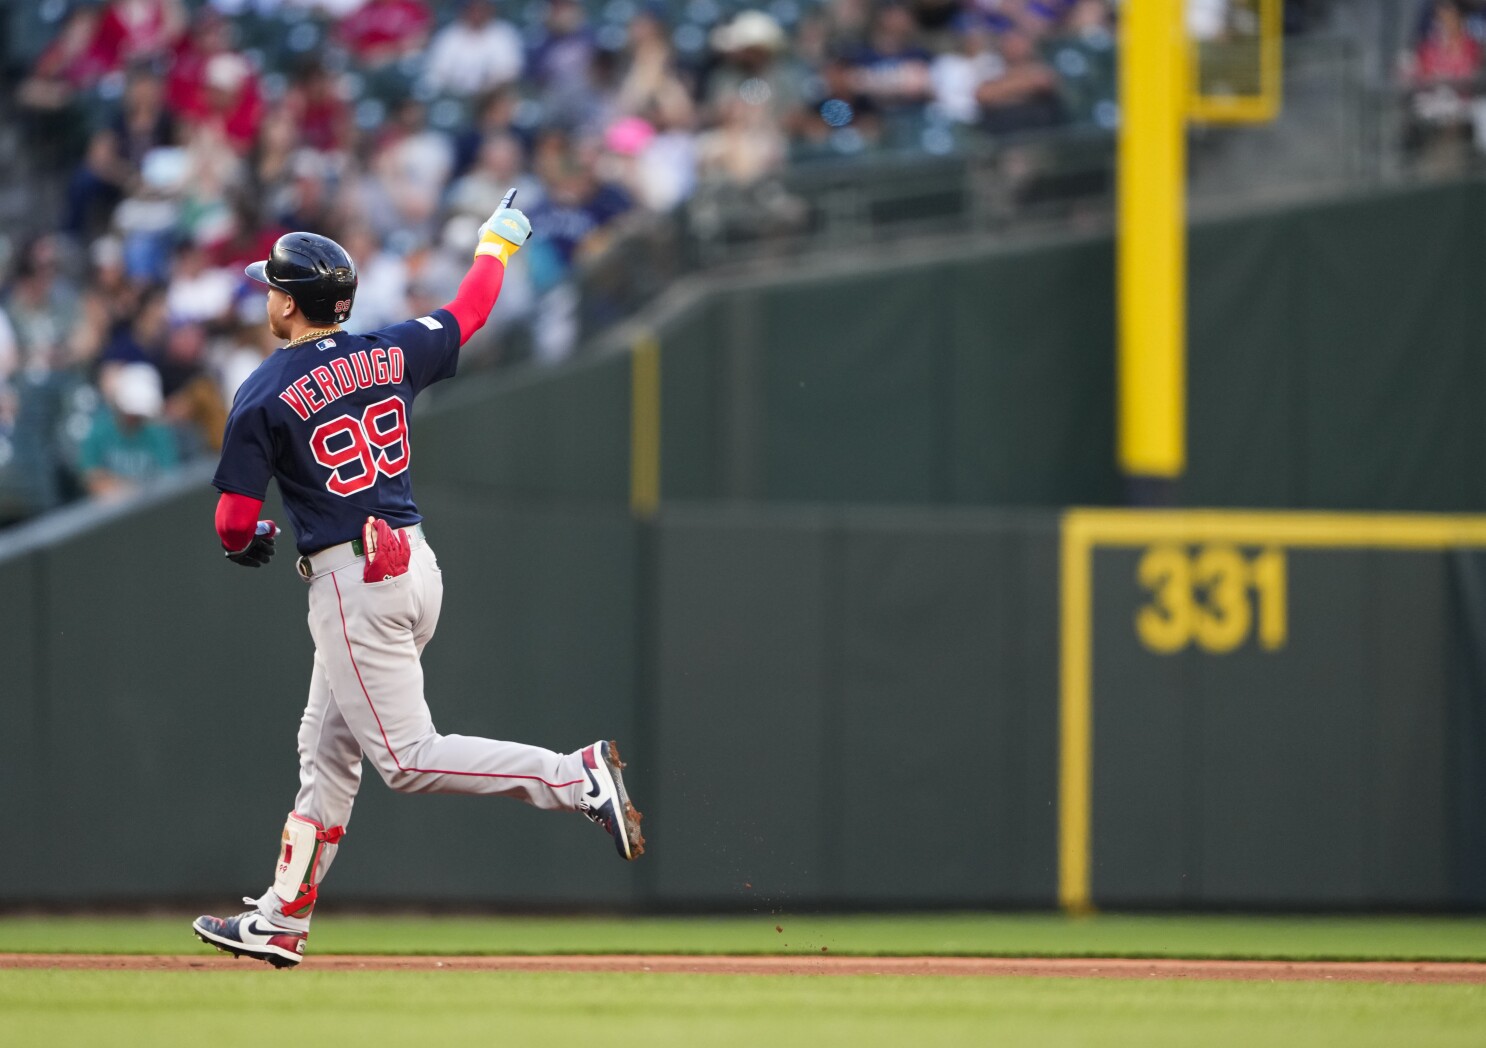 Story hits 3 homers for Red Sox in 12-6 win over Mariners - What's